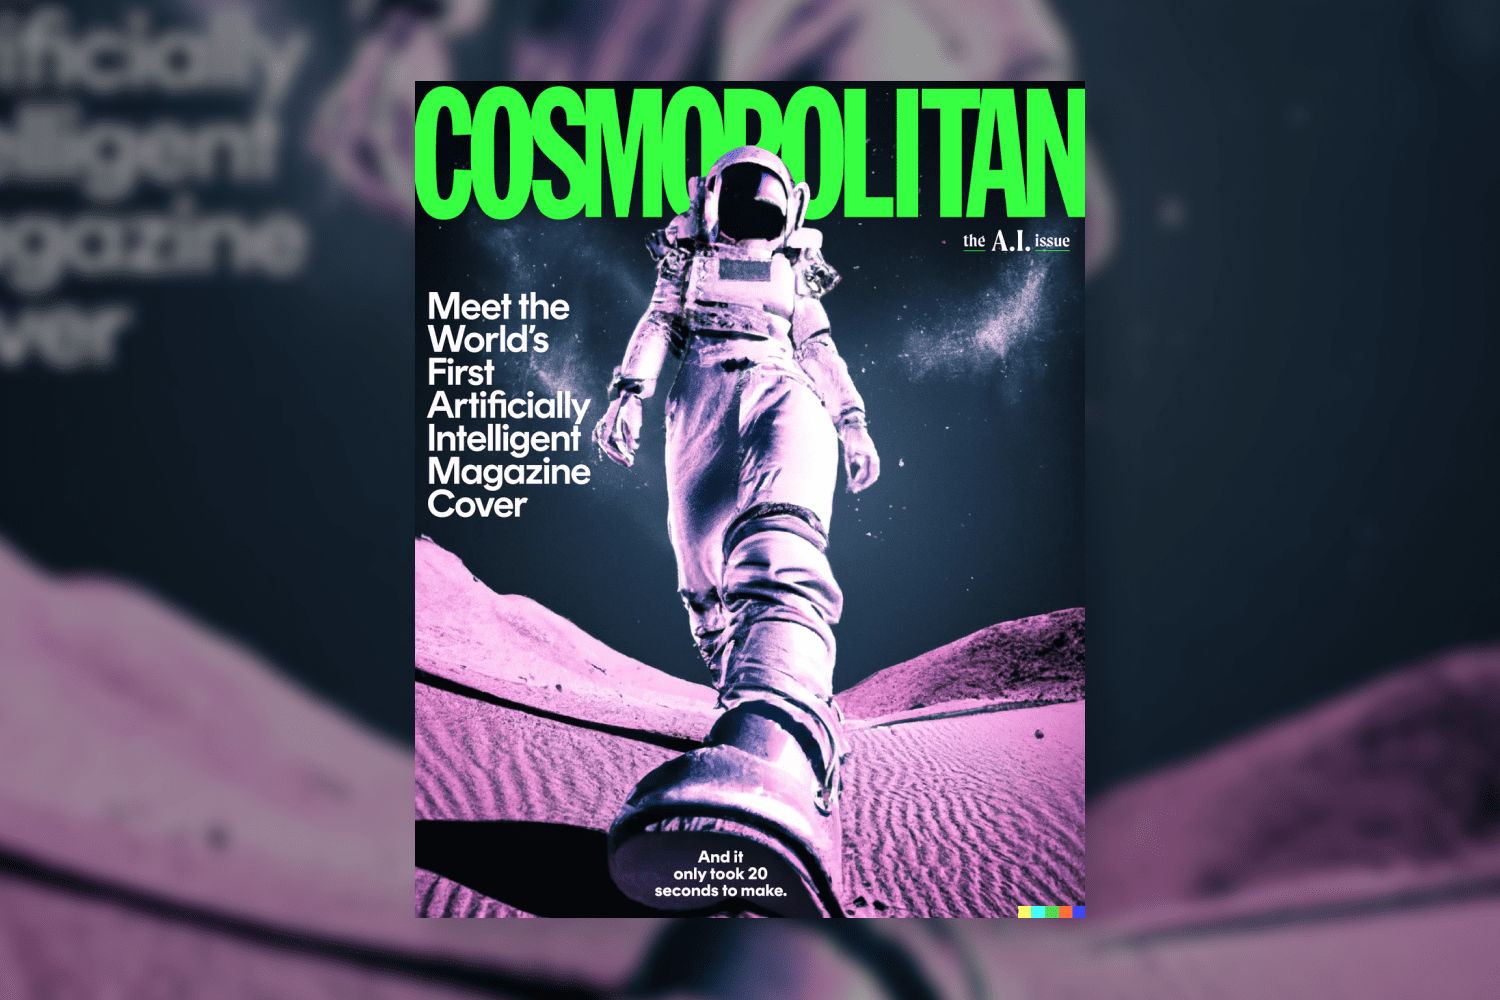 Cover of Cosmopolitan magazine with astronaut in pink colors.